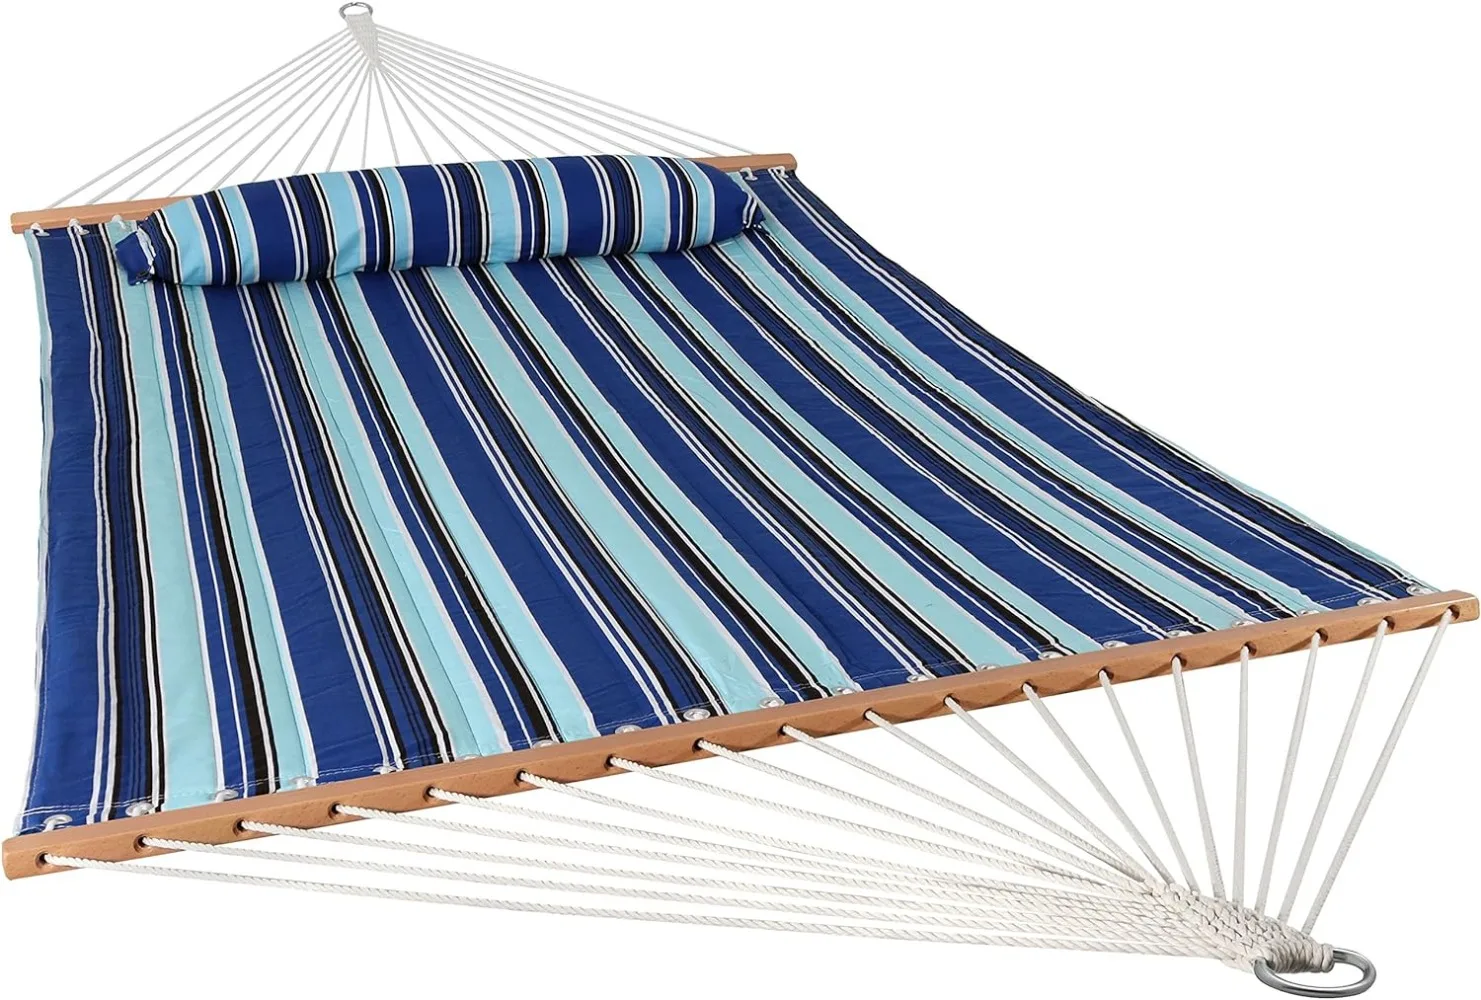 

Sunnydaze Outdoor Quilted Fabric Hammock - Two-Person with Spreader Bars - Heavy-Duty 450-Pound Capacity